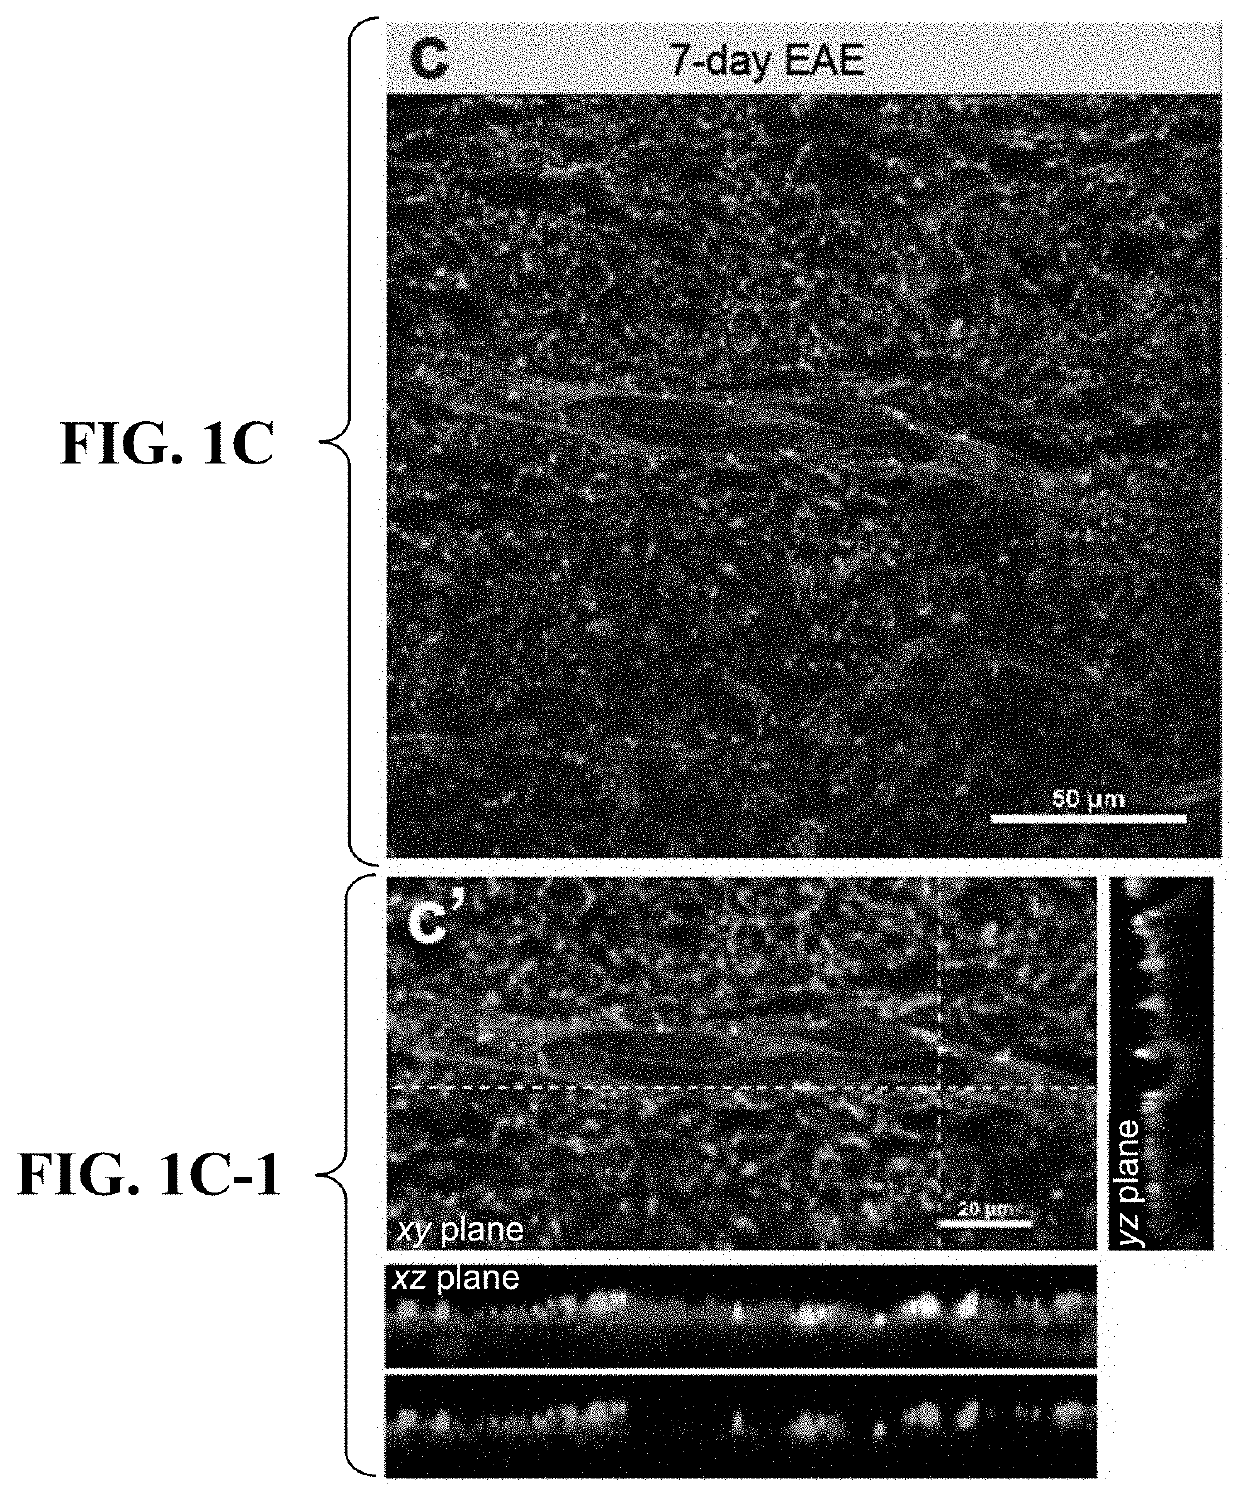 Inhibition of vascular endothelial cell-mediated phagocytic processes for treatment of demyelinating conditions